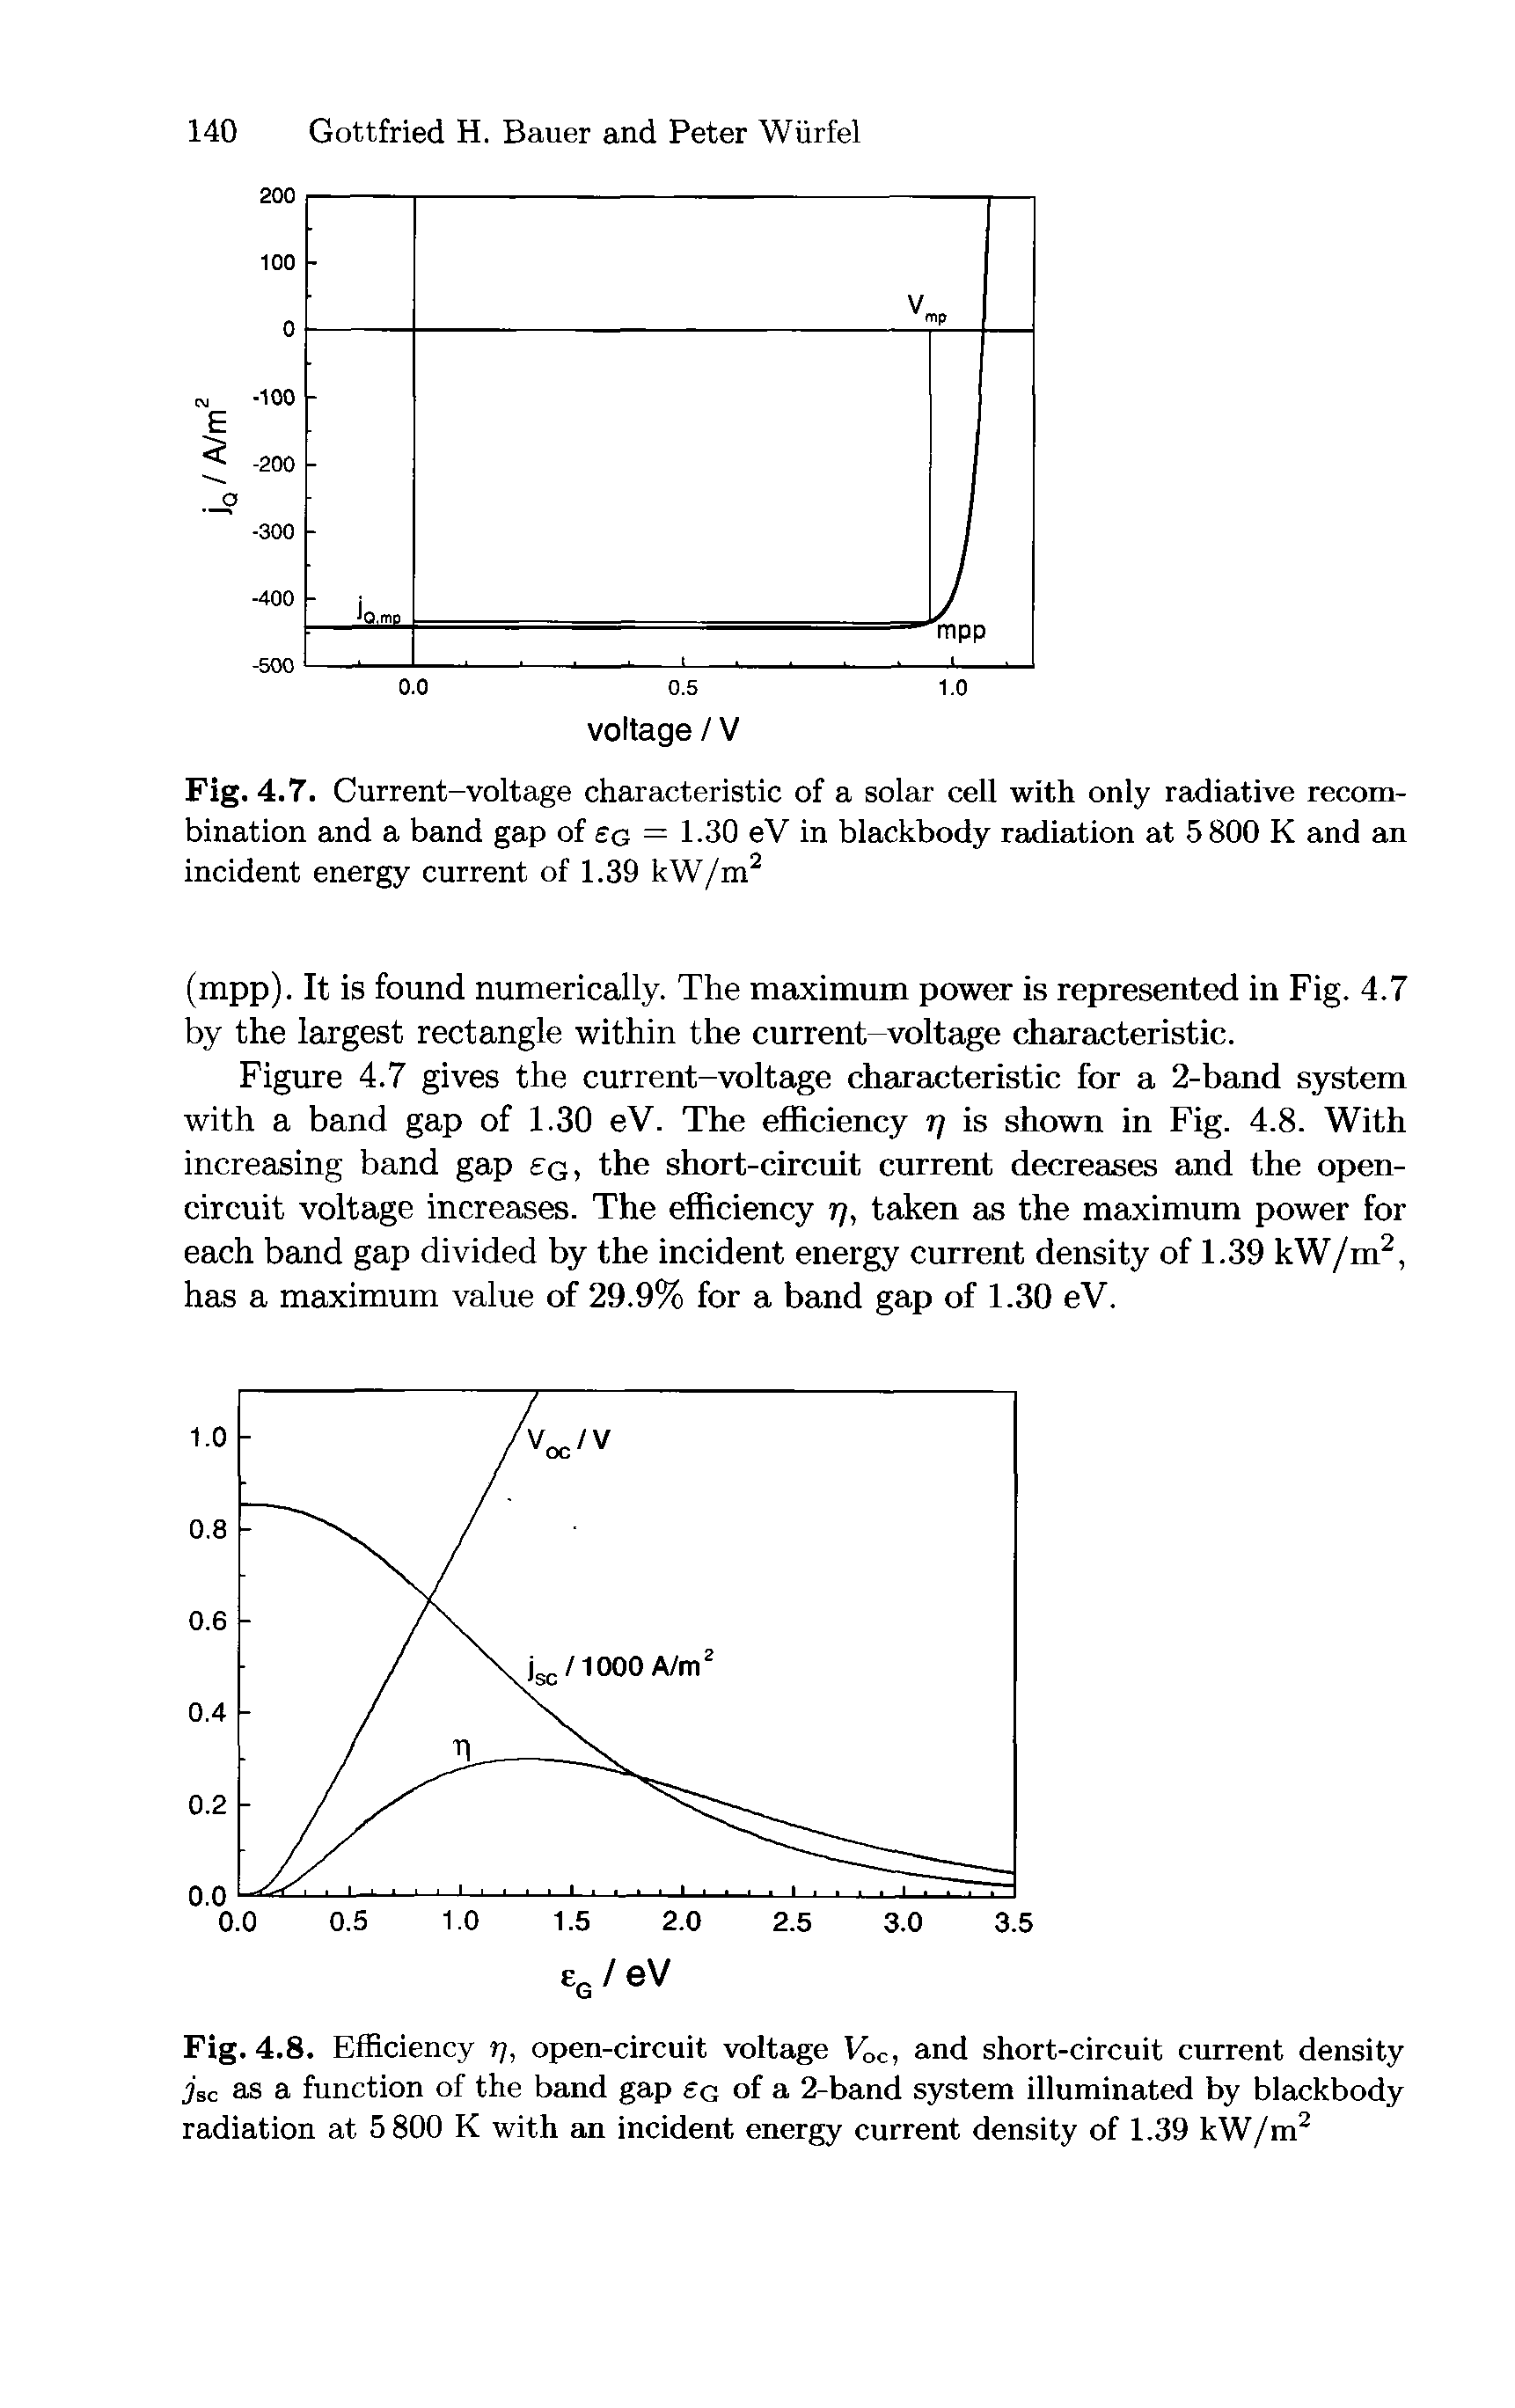 Fig. 4.8. Efficiency rj, open-circuit voltage Voc, and short-circuit current density jsc as a function of the band gap a of a 2-band system illuminated by blackbody radiation at 5 800 K with an incident energy current density of 1.39 kW/m2...